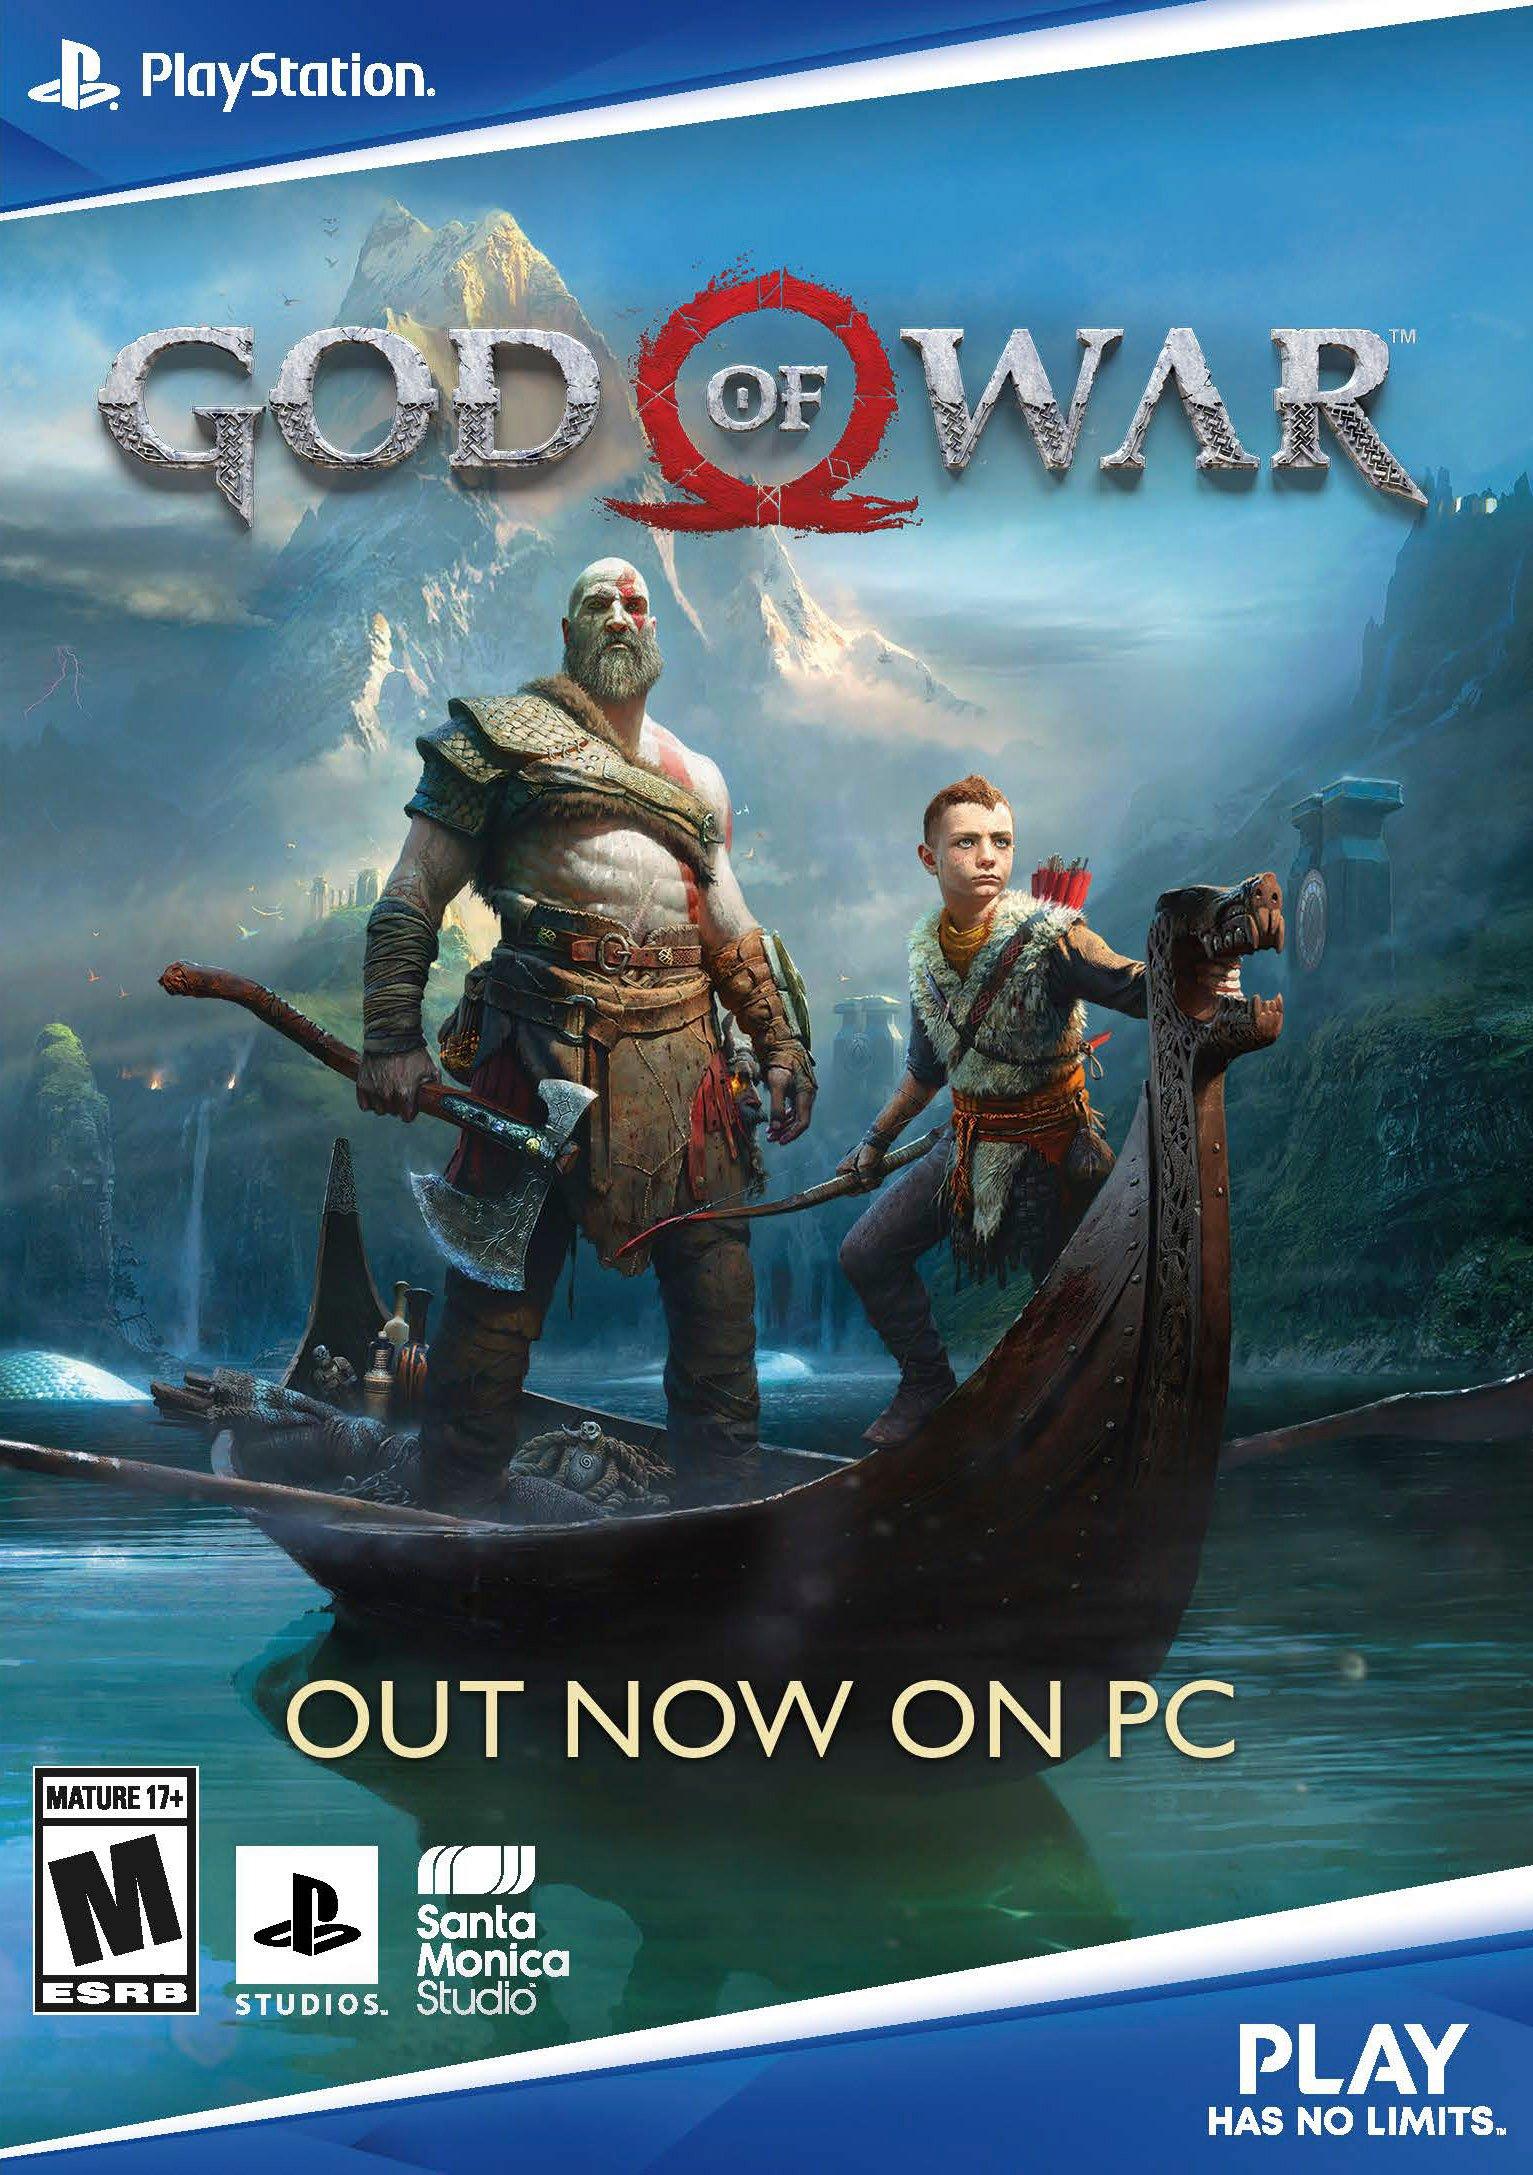 God of War PC controls & key bindings for mouse, keyboard